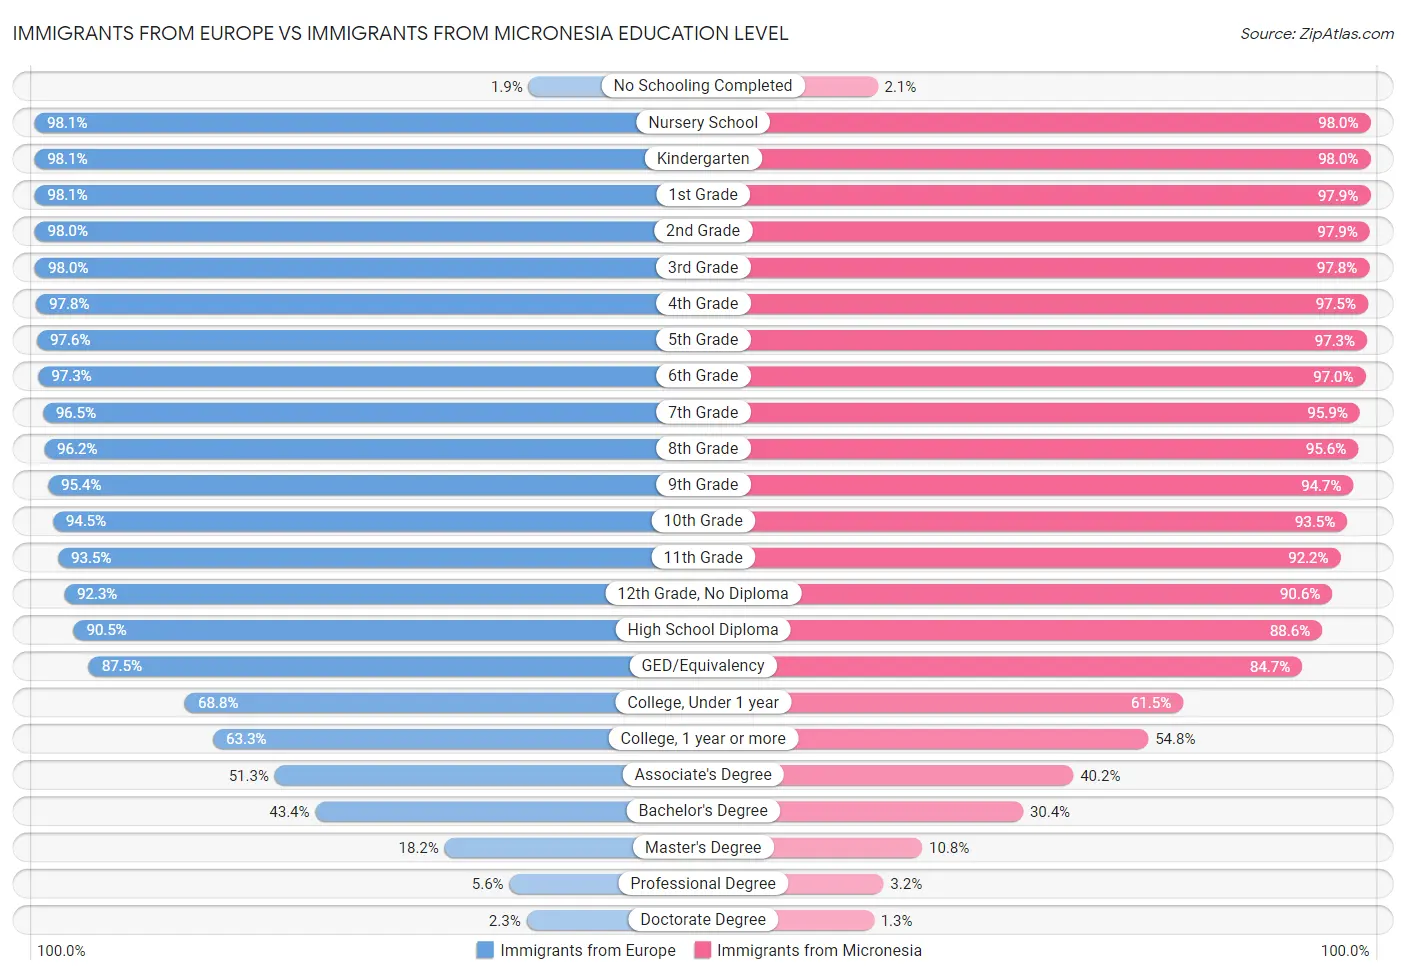 Immigrants from Europe vs Immigrants from Micronesia Education Level